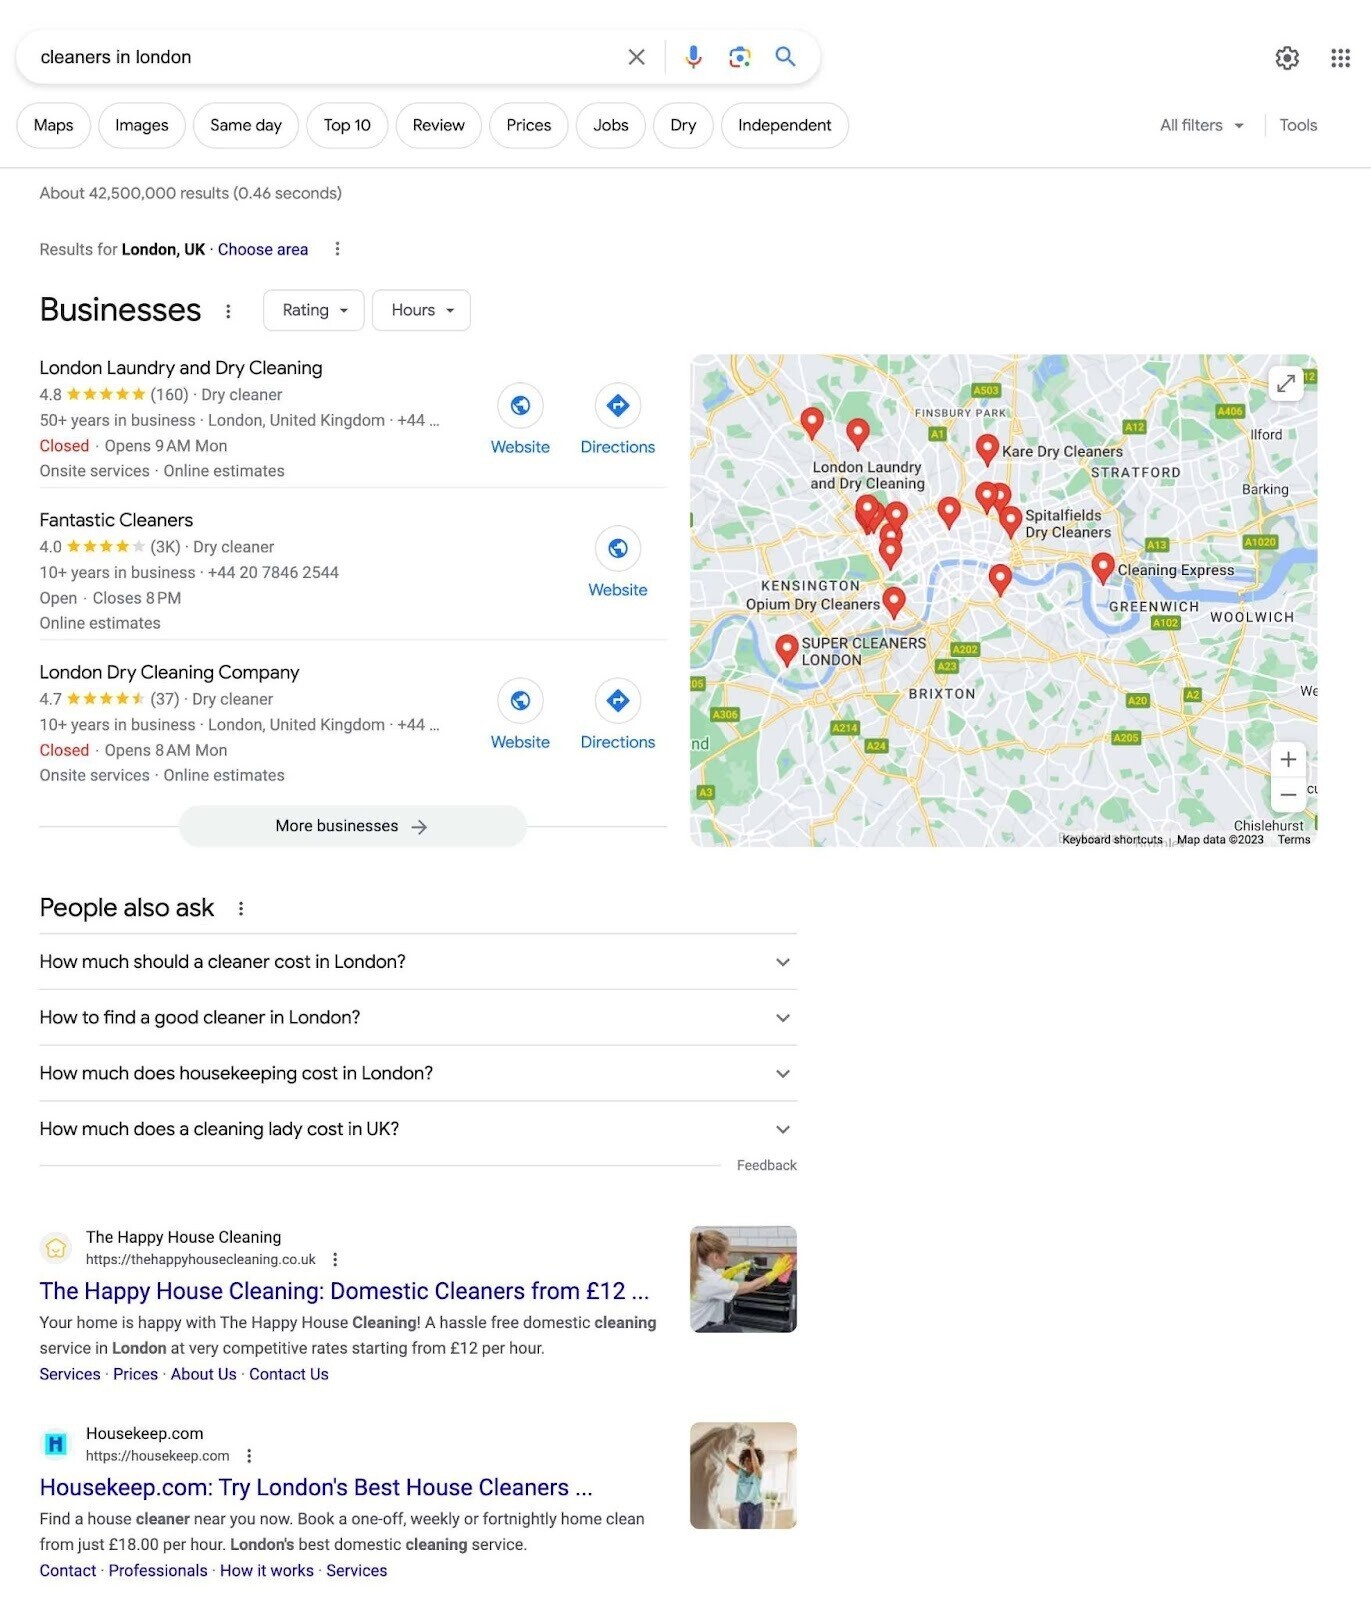 Google SERP for "cleaners in London"